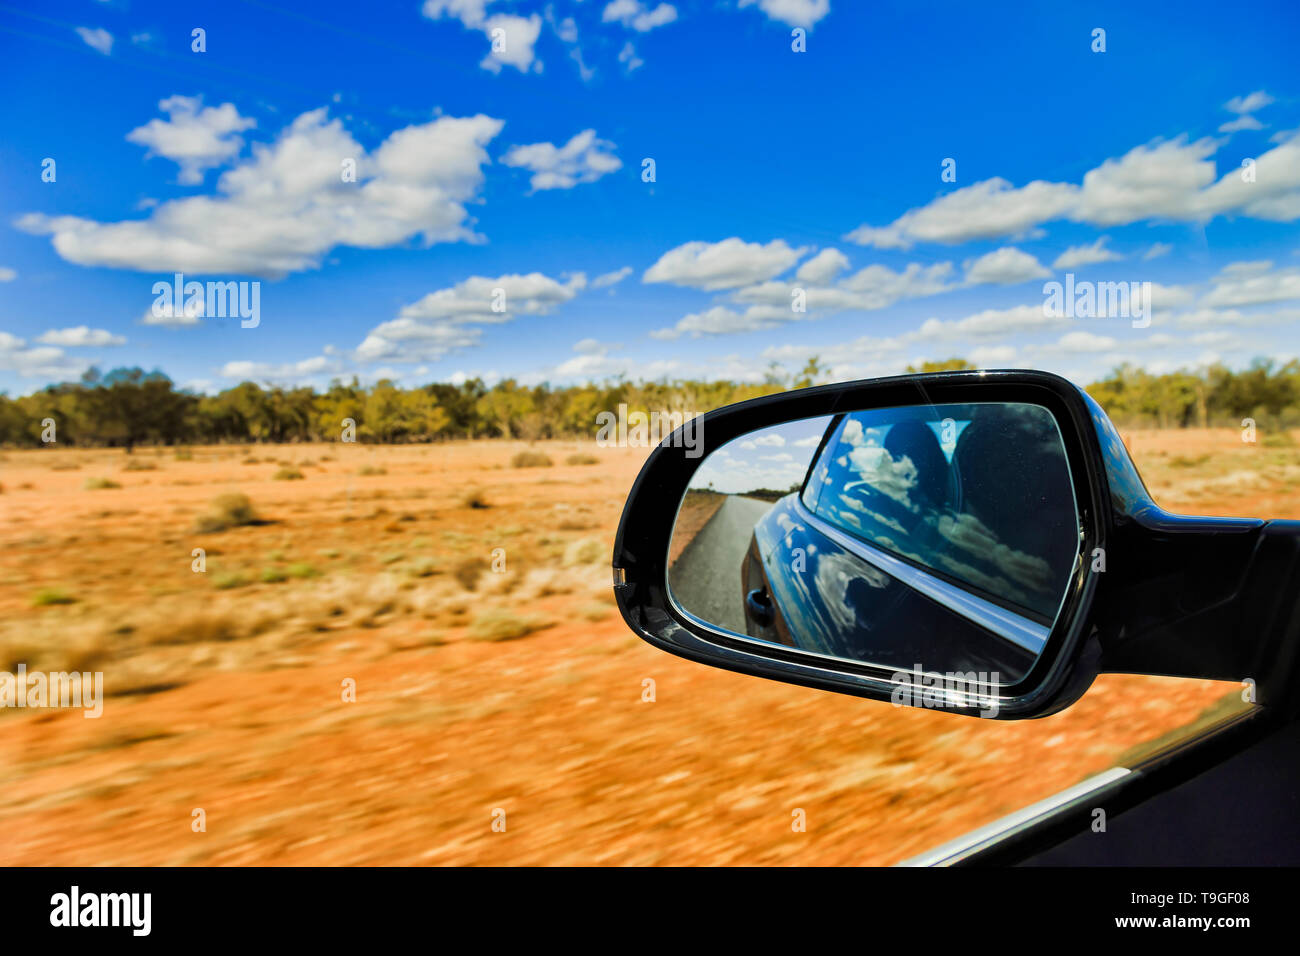 Australian outback red soil and scarse gum-trees under blue sky with rear view mirror through driving car blurring road side. Stock Photo